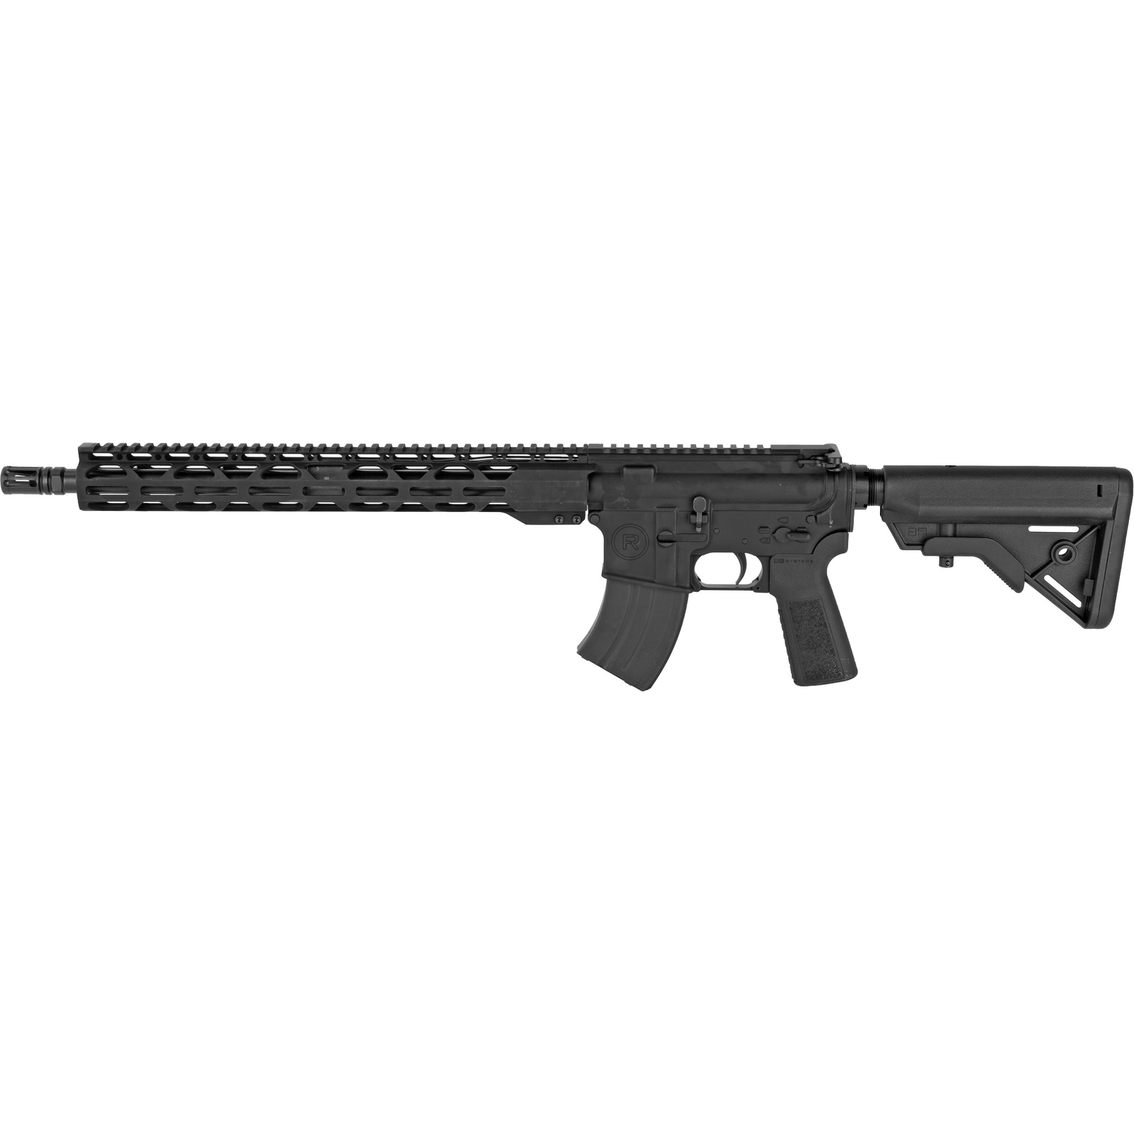 Radical Firearms RPR 7.62X39 16 in. Barrel Rifle Black, 10 Rounds - Image 2 of 3